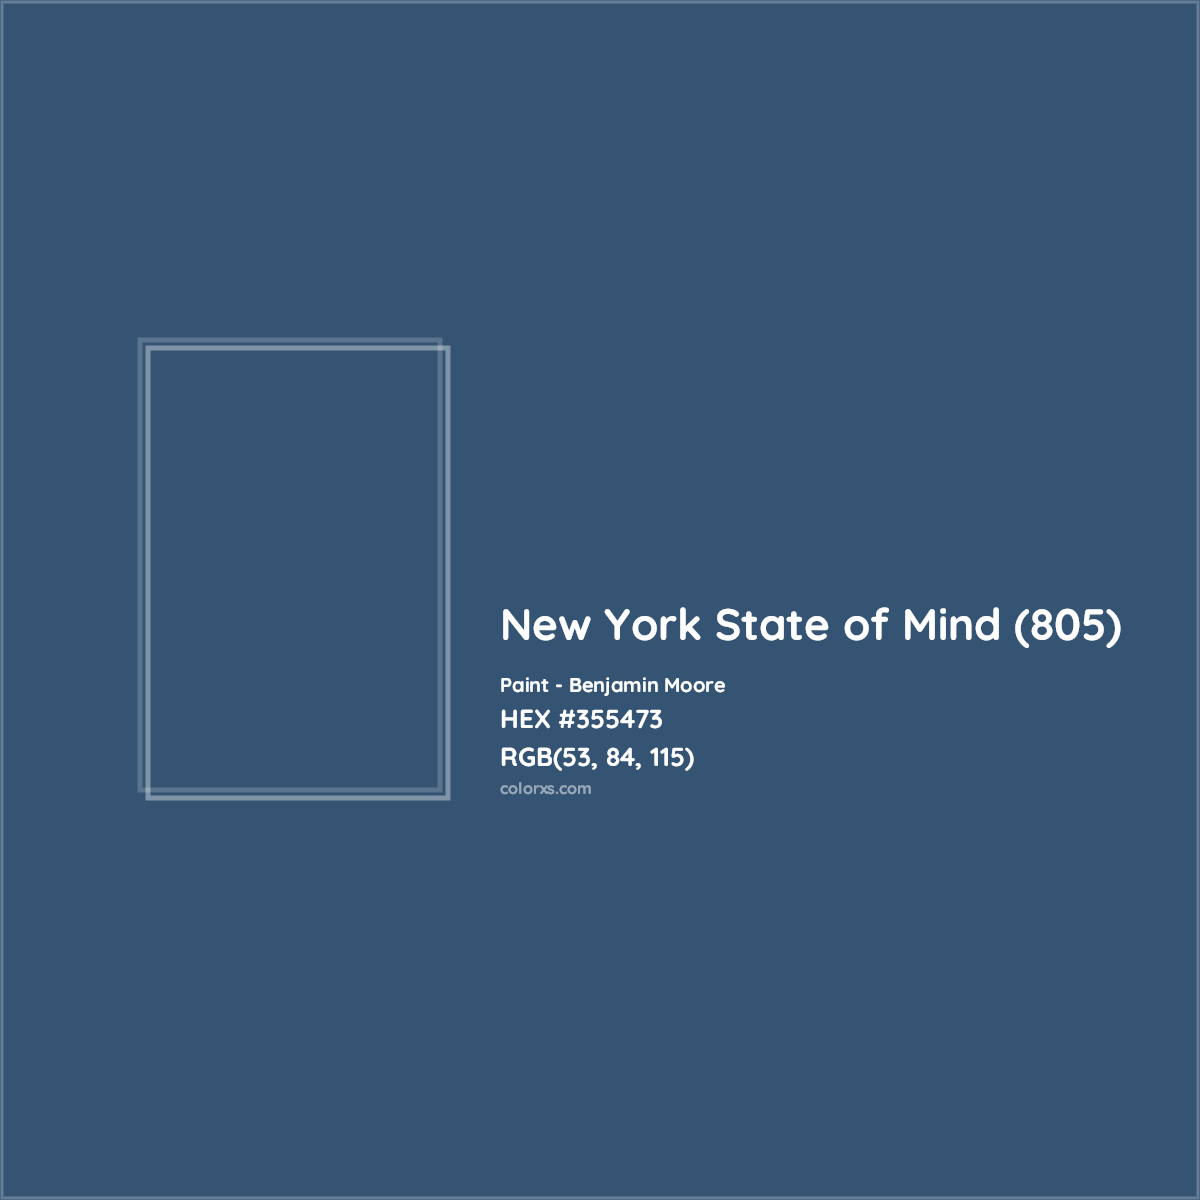 HEX #355473 New York State of Mind (805) Paint Benjamin Moore - Color Code